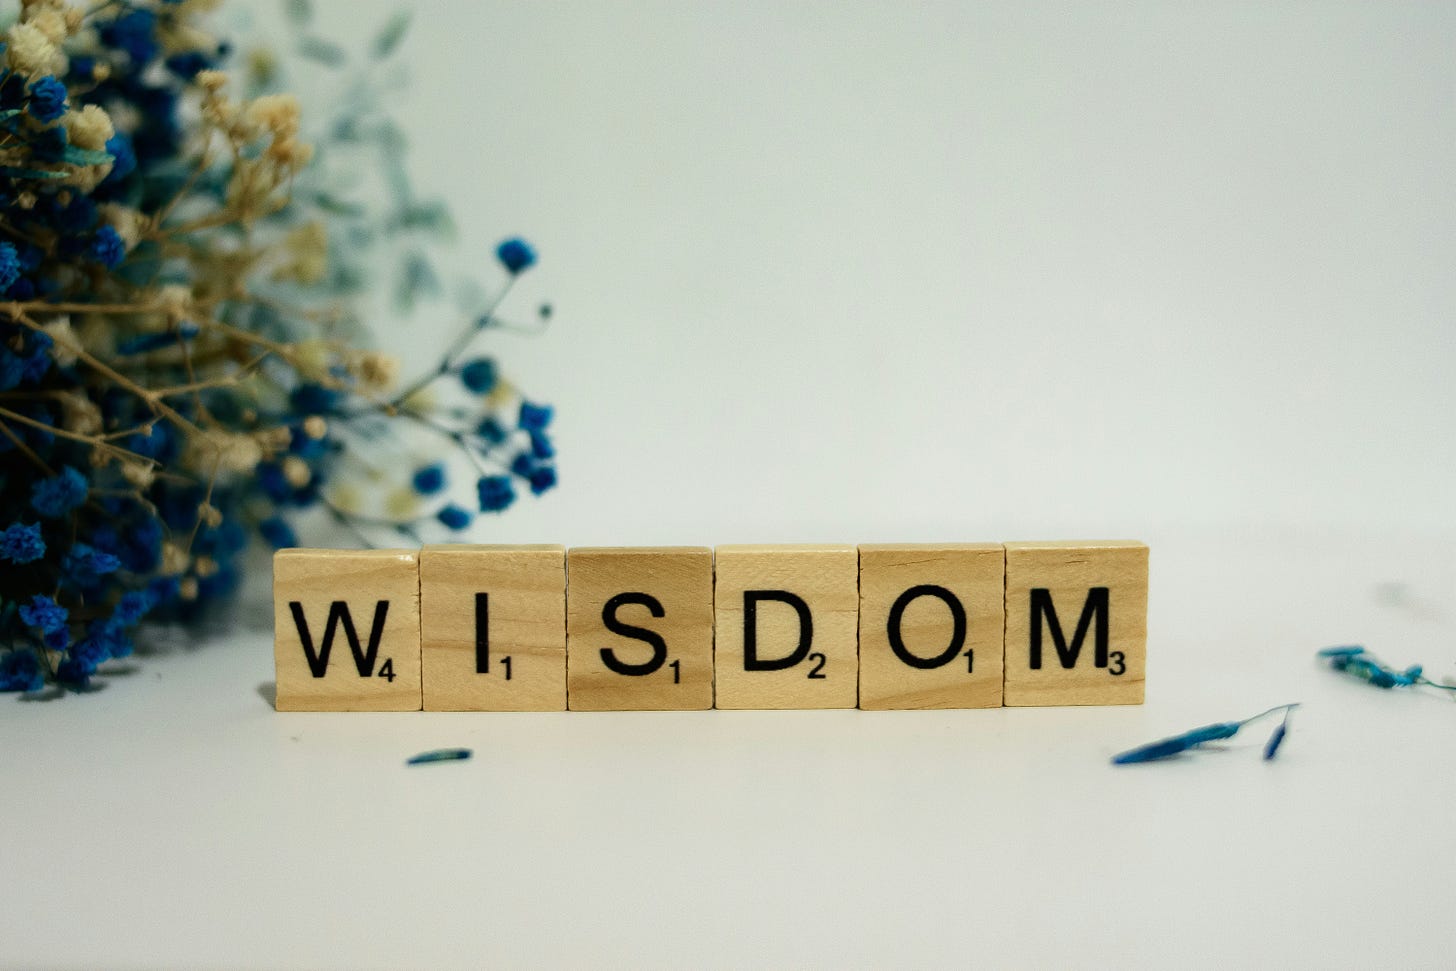 The word "wisdom" written out using scrabble tiles, set against a white background. 